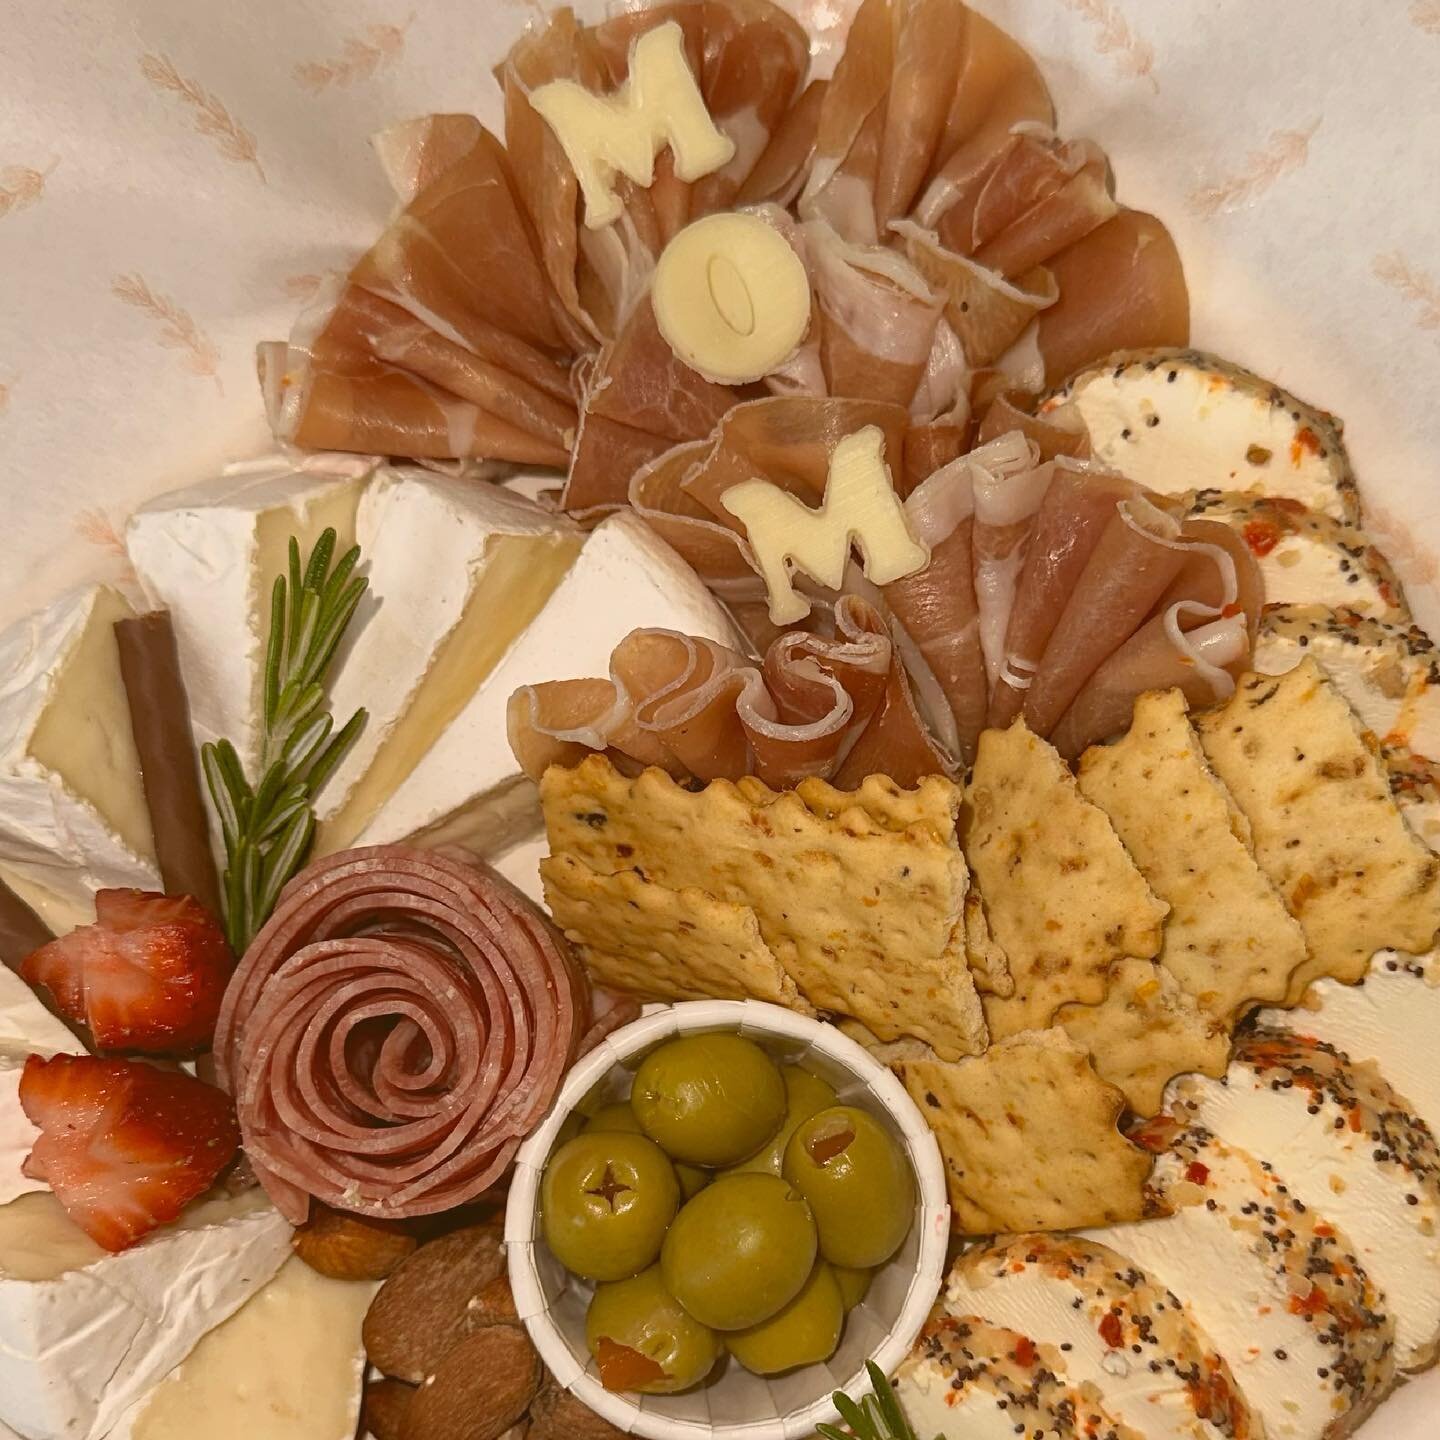 Baltimore Cheese & Charcuterie Boards